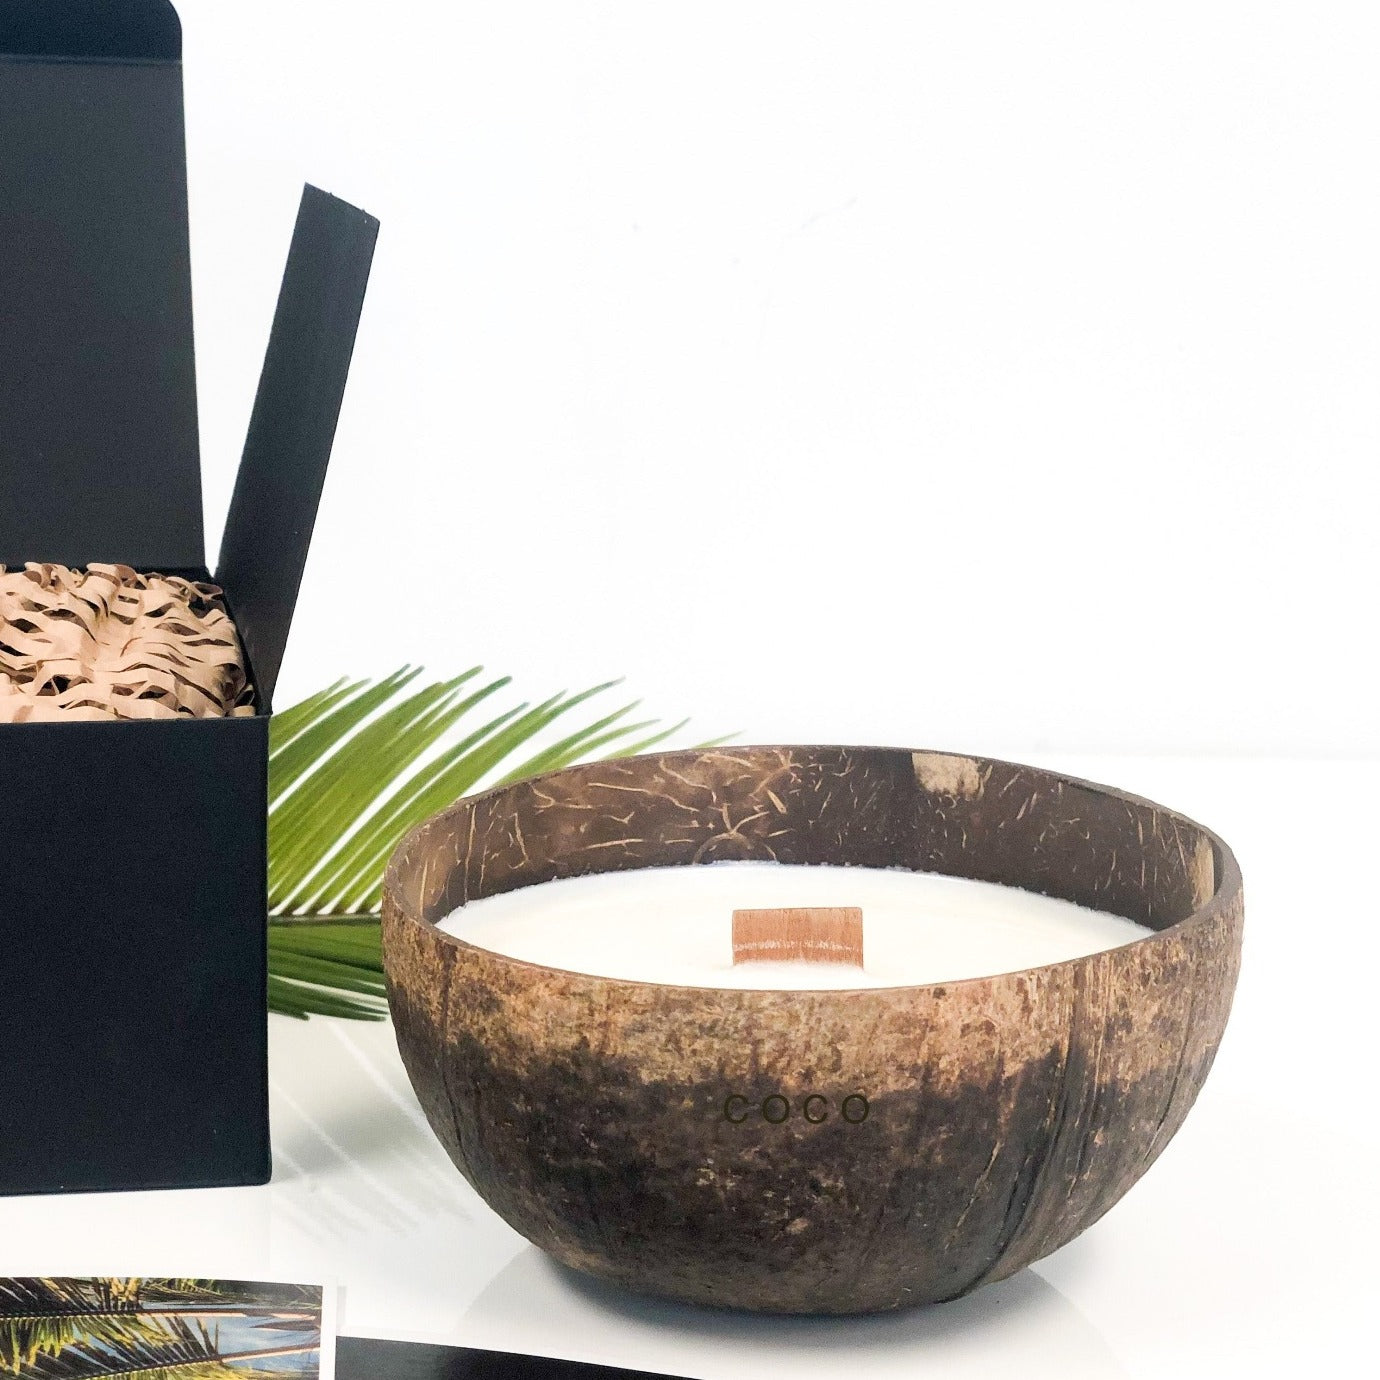 Tulum coconut candle - ritual candles from The Luxe Candle Co